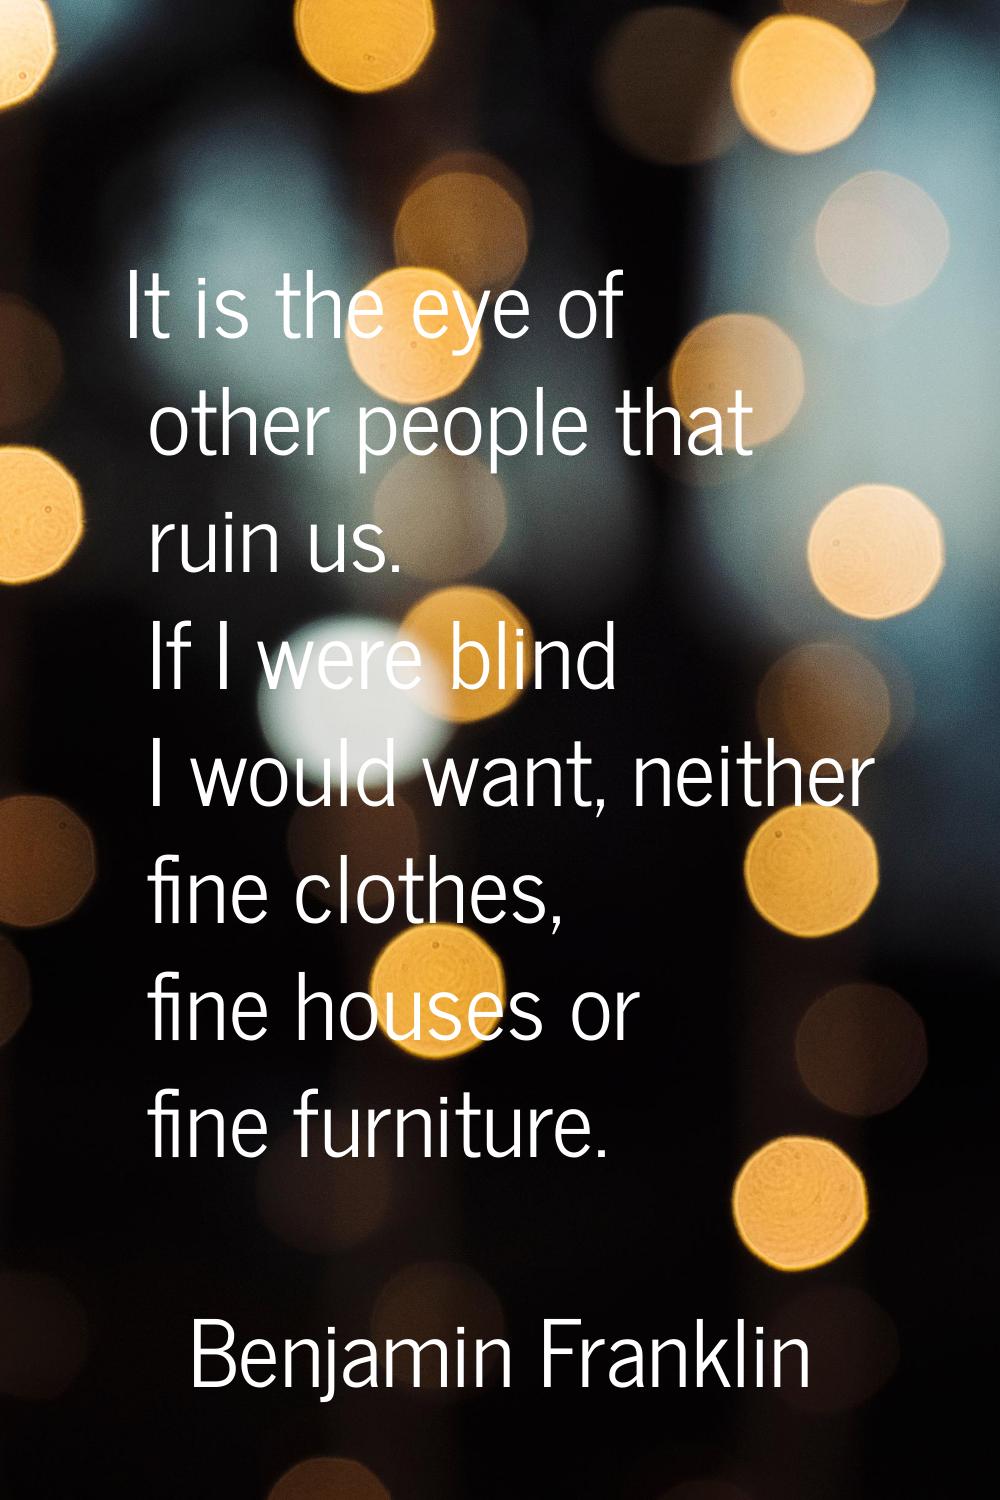 It is the eye of other people that ruin us. If I were blind I would want, neither fine clothes, fin